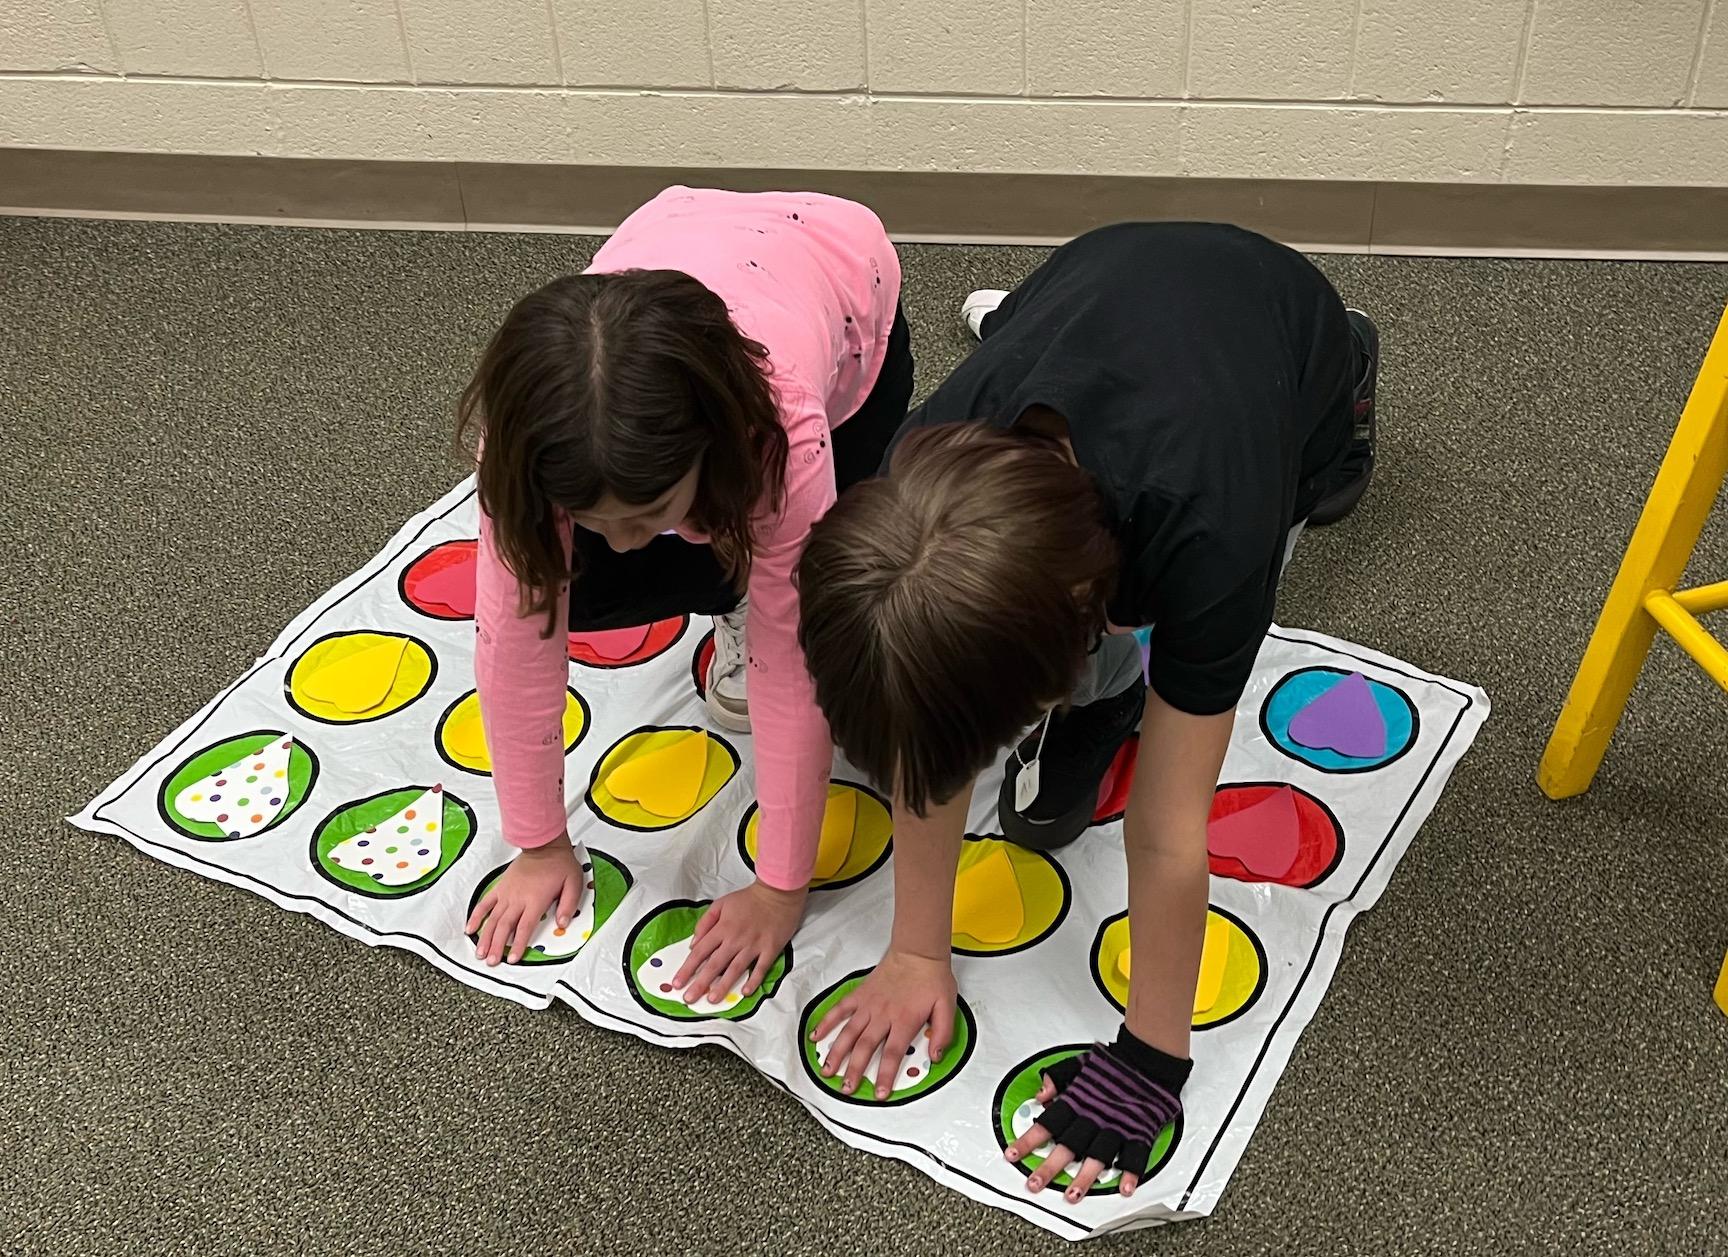 At Trafford Elementary, 2nd-graders Brooklyn Bost and Ares Lyle play a game of Heart Twister